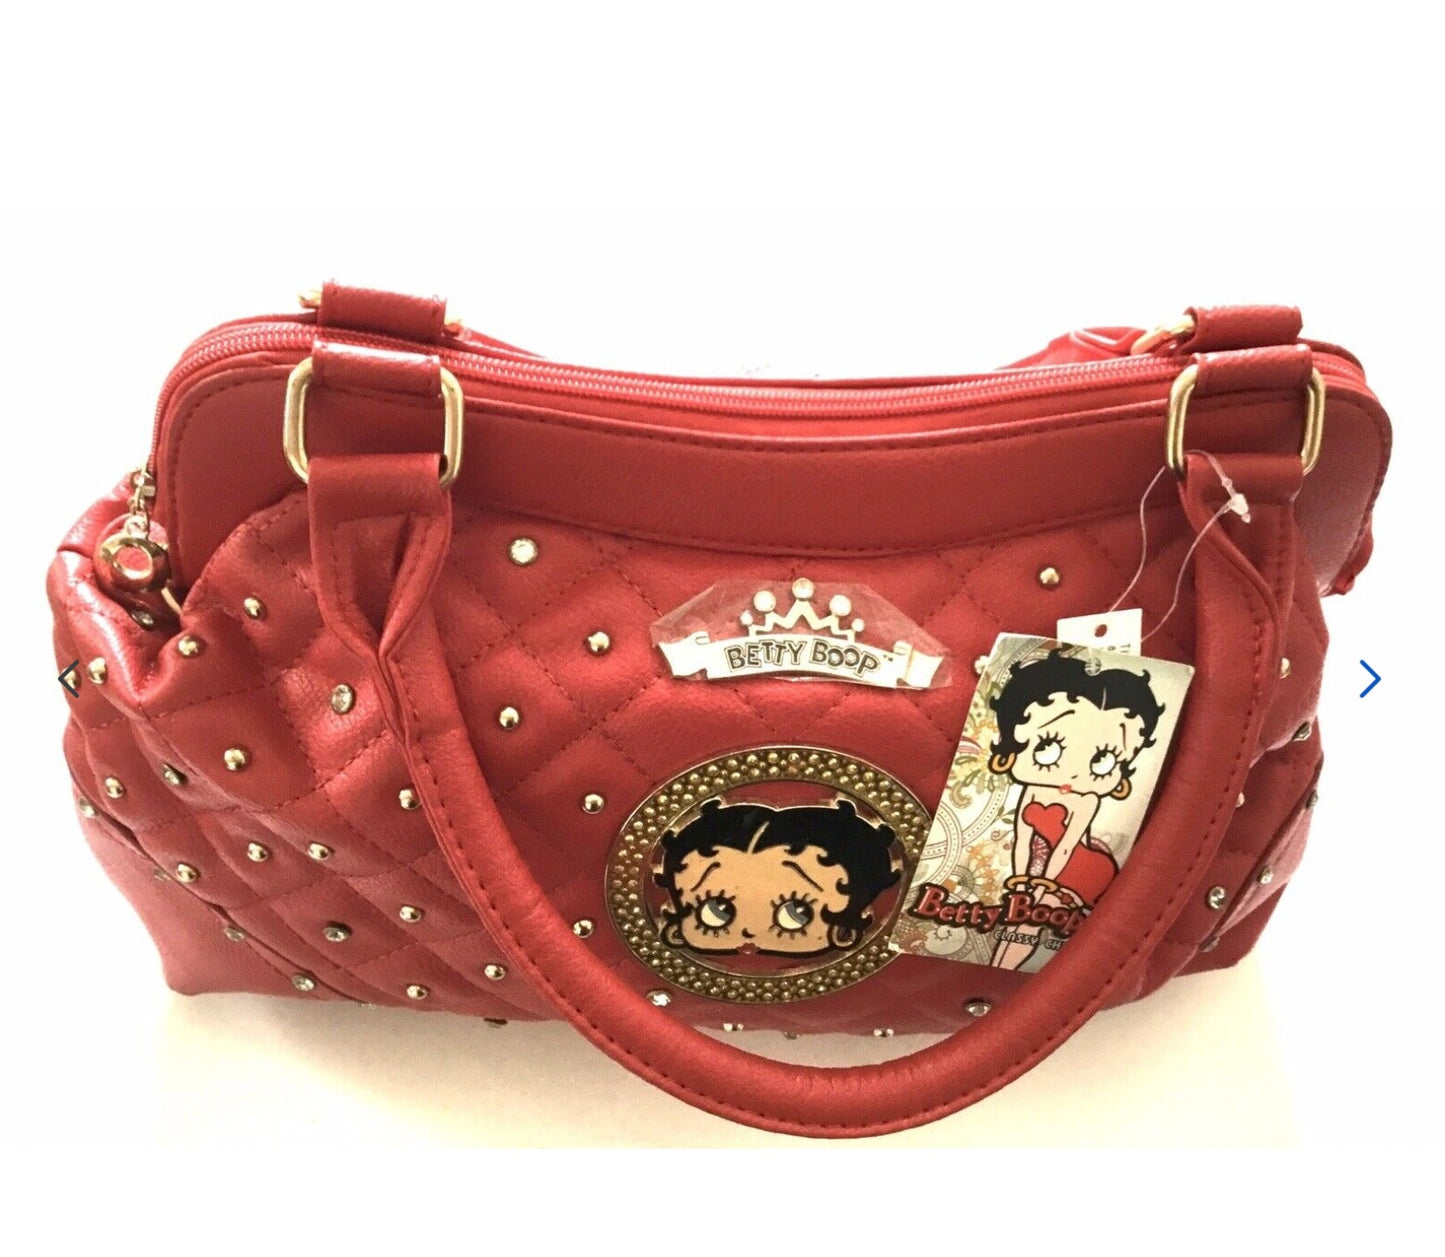 Betty Boop Classy Red Large Bag KF-4593RED with Gold beads and Emblem 39 x 29cms